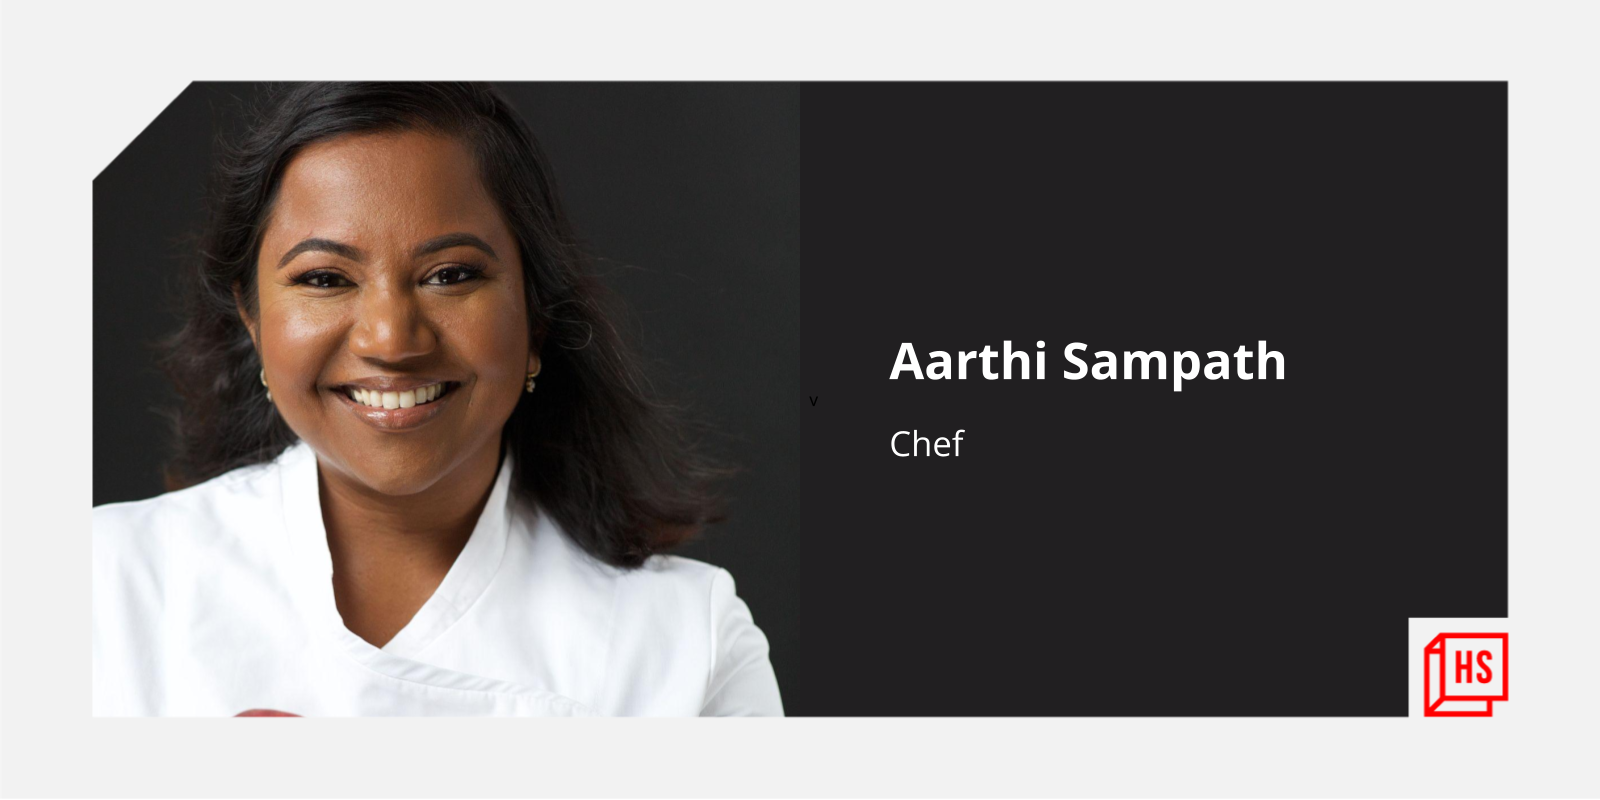 Michelin-star restaurants, a food truck, celebrity judge on Tamil MasterChef – how chef Aarthi Sampath is living the ‘food’ life